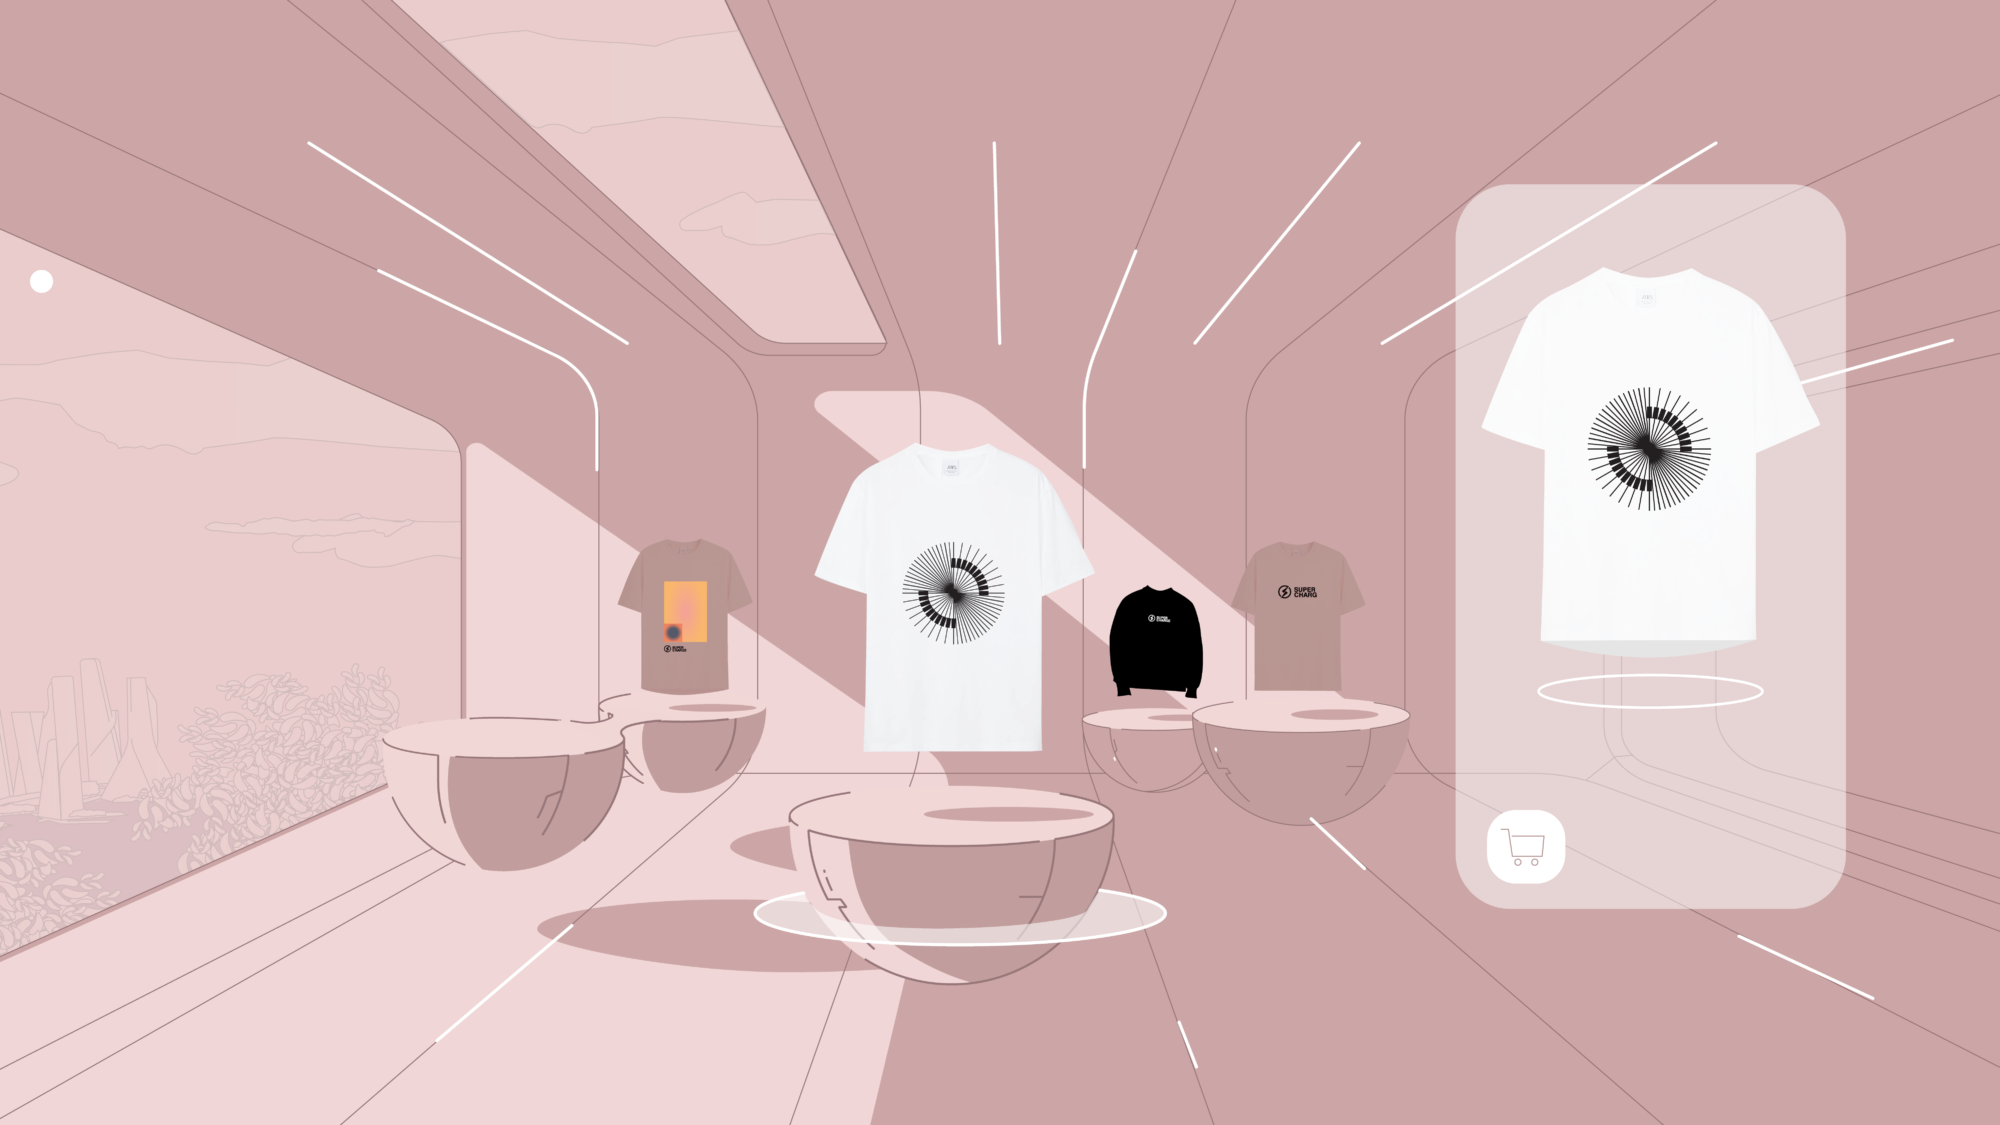 SPRCHRG metaverse clothing store concept